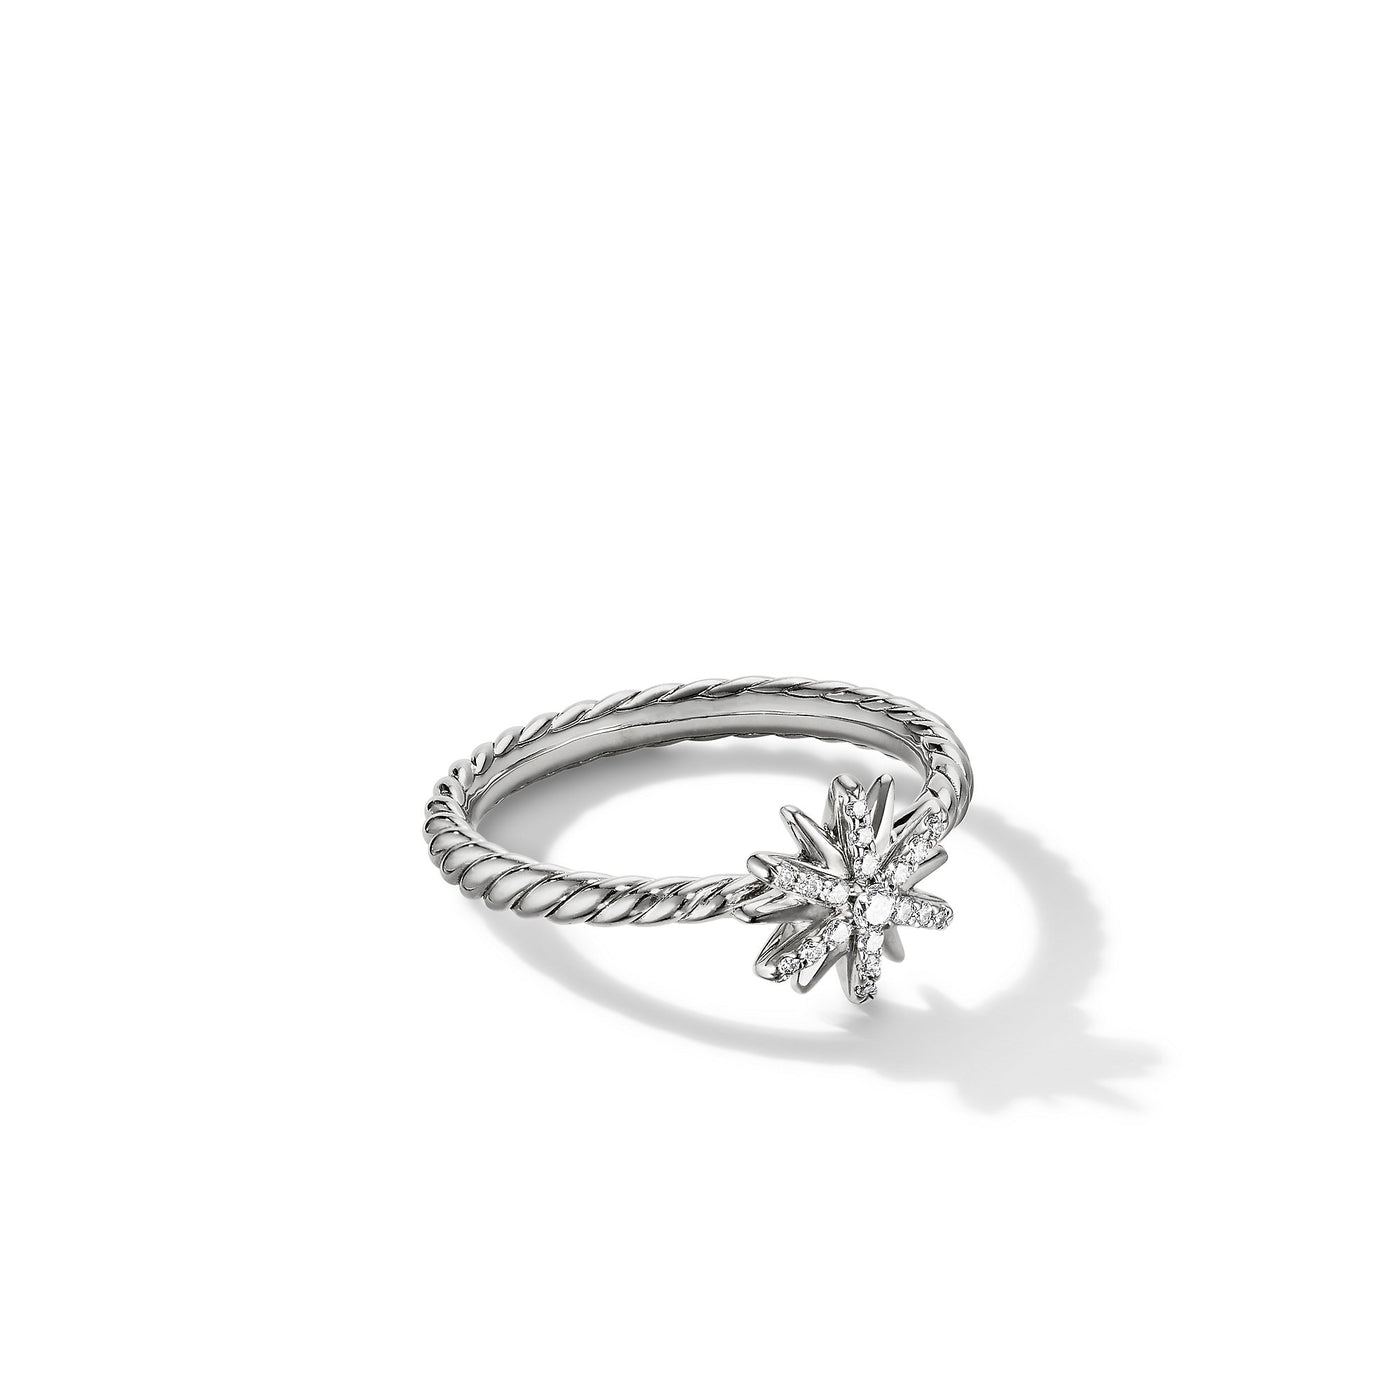 Petite Starburst Ring in Sterling Silver with Diamonds\, 10mm